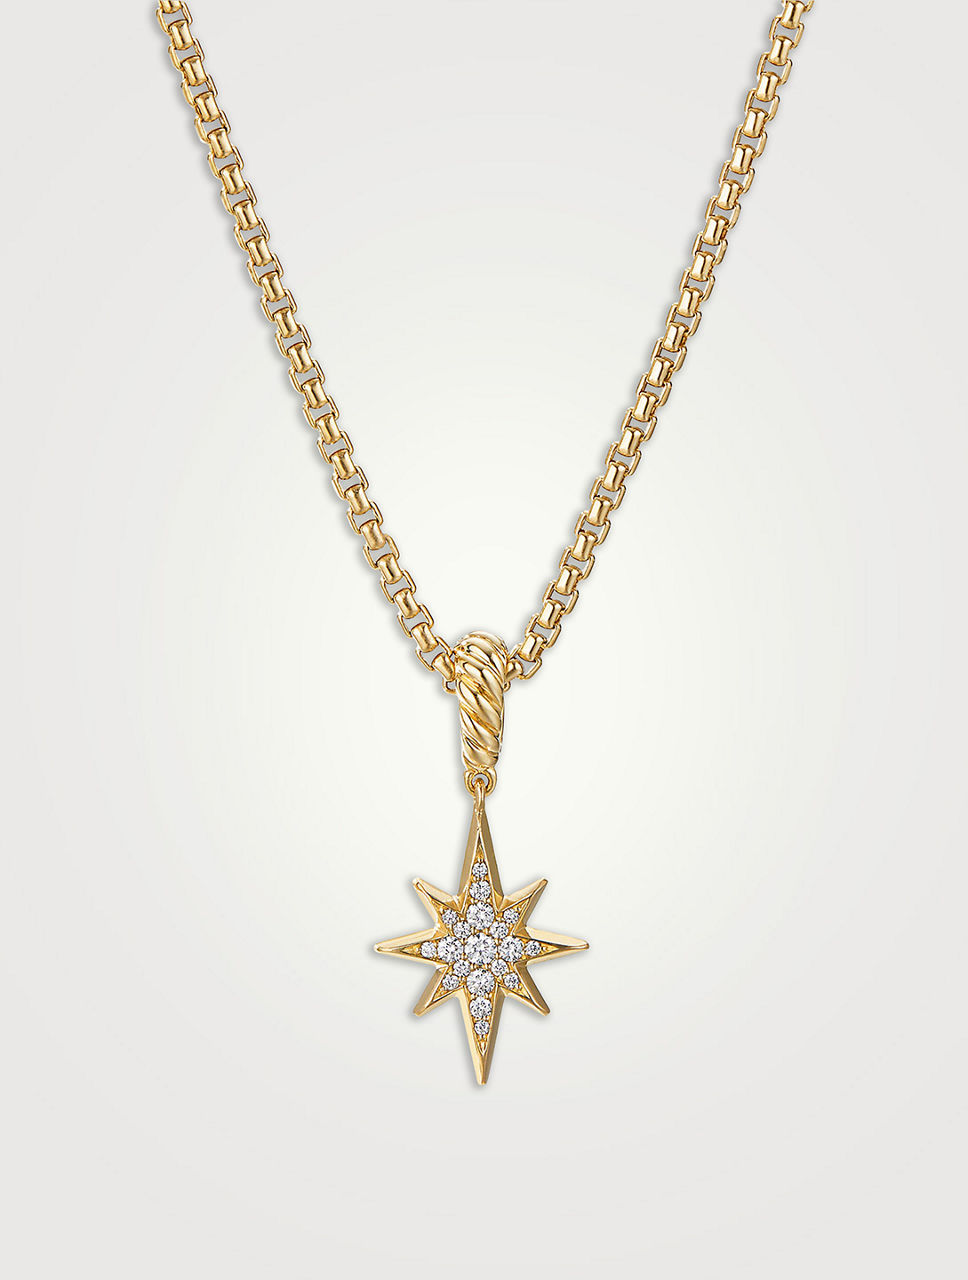 North Star Amulet In 18k Yellow Gold With Pavé Diamonds